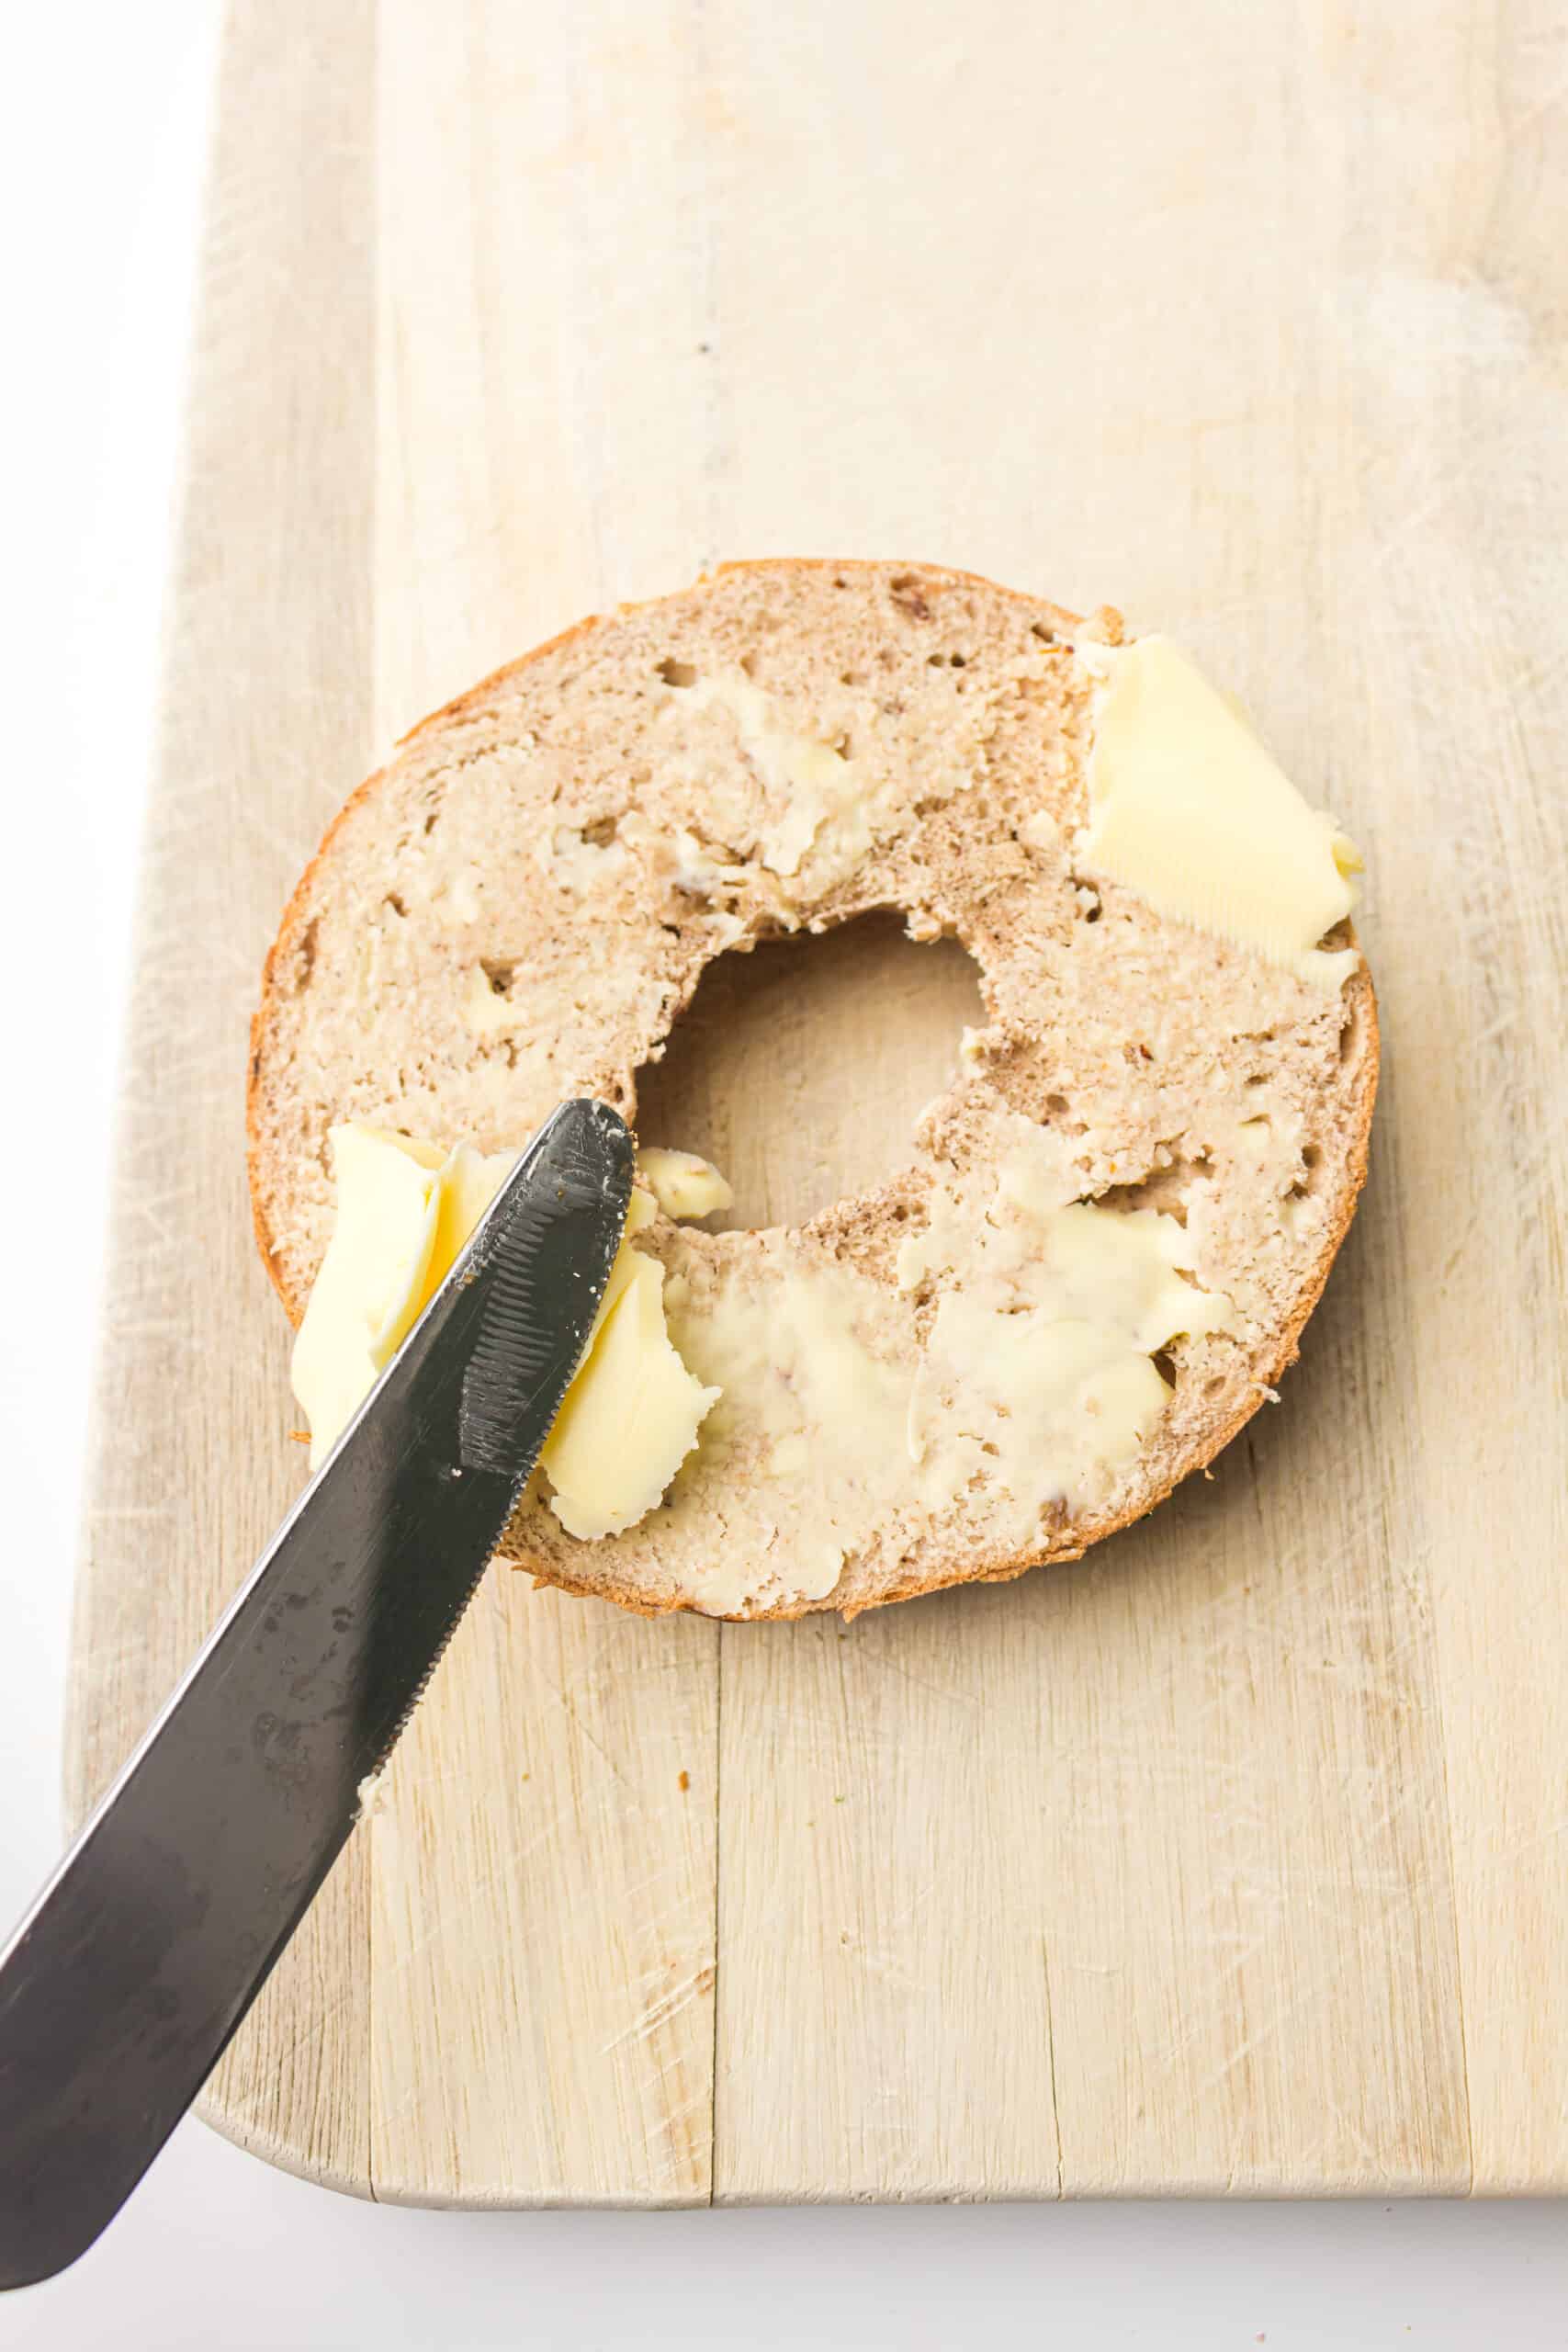 Buttering the bagel
